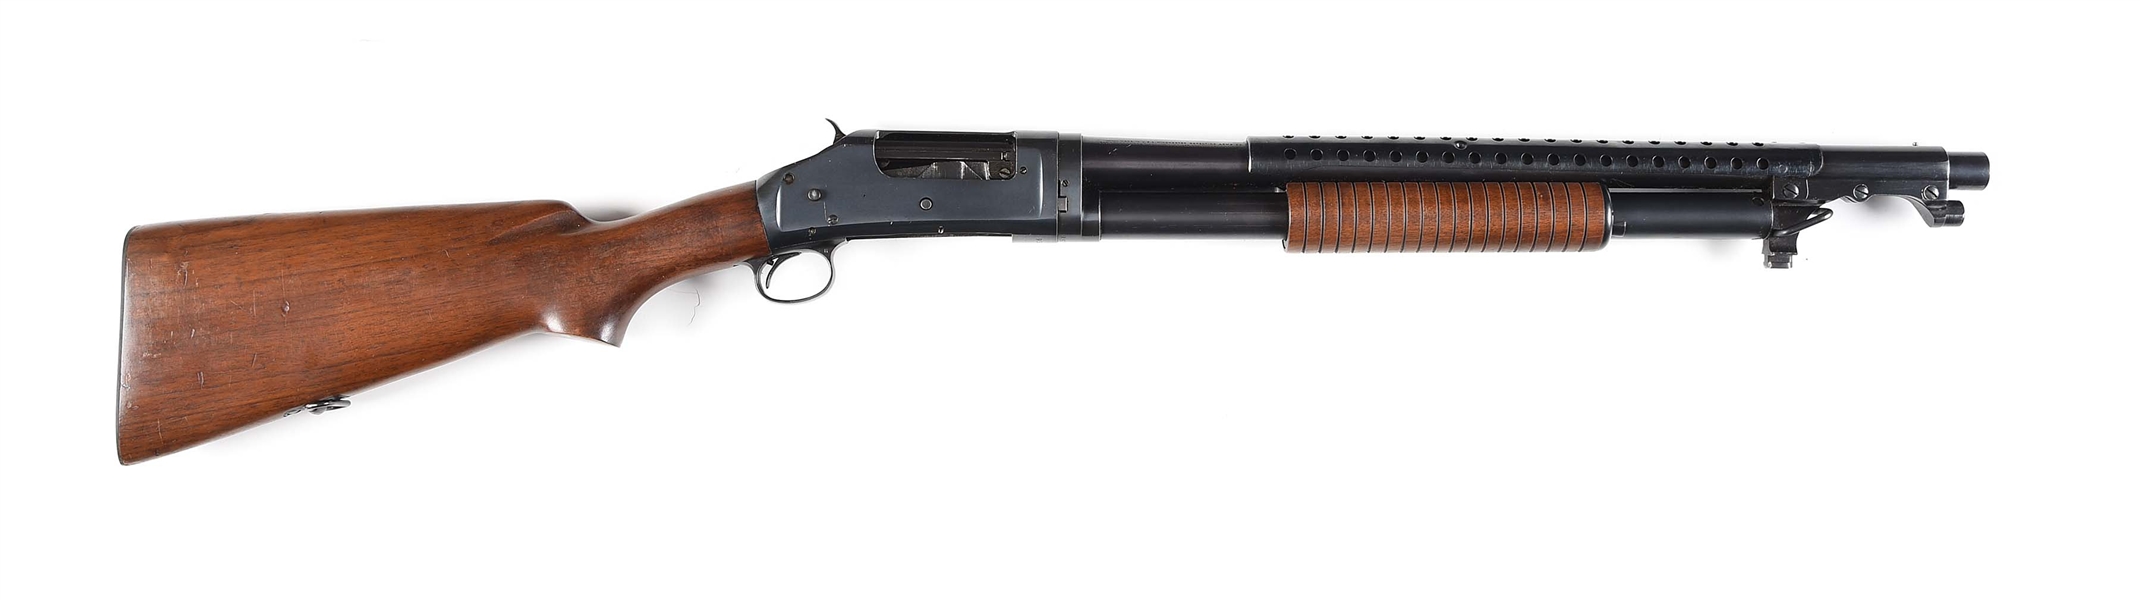 (C) EXTREMELY FINE WINCHESTER 1897 TRENCH GUN (1943)